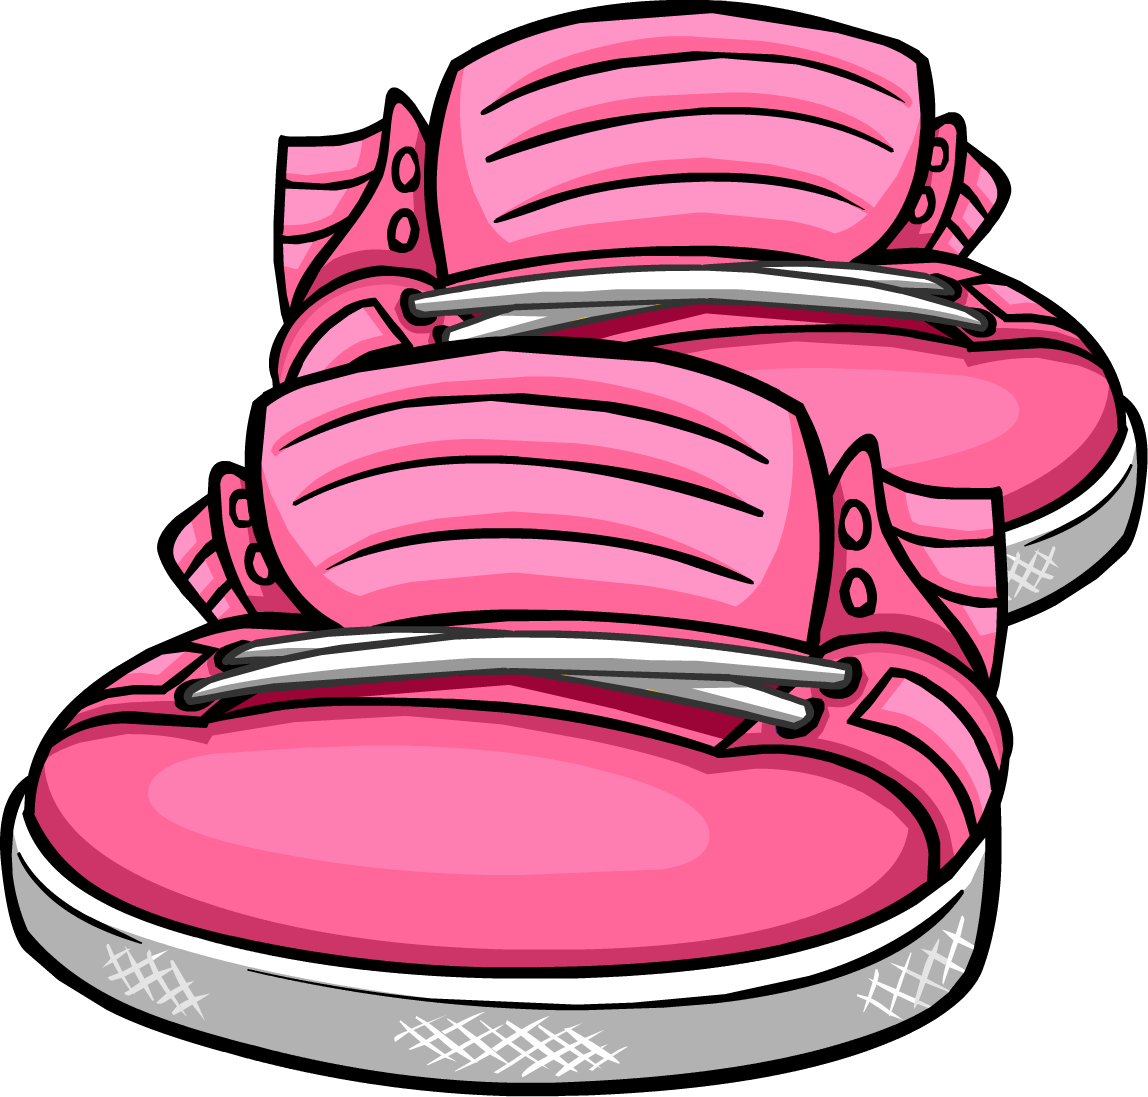 Rhama Cp Pink 2 Neon Pink Sneakers Club Penguin Wiki - Club Penguin Pink Shoes (1148x1097)